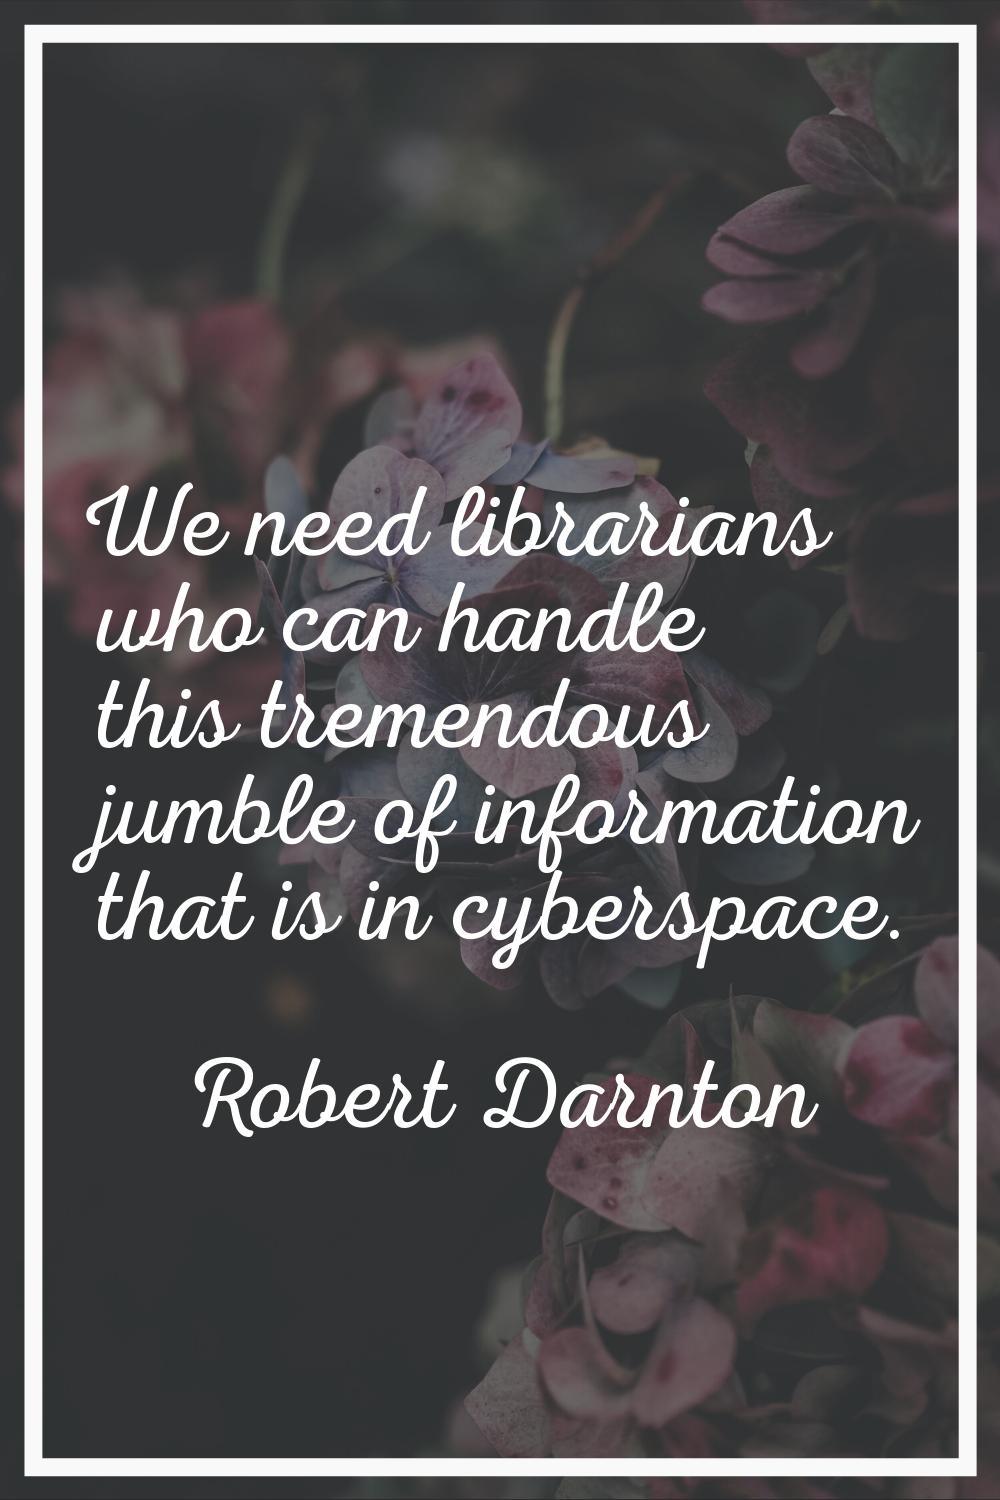 We need librarians who can handle this tremendous jumble of information that is in cyberspace.